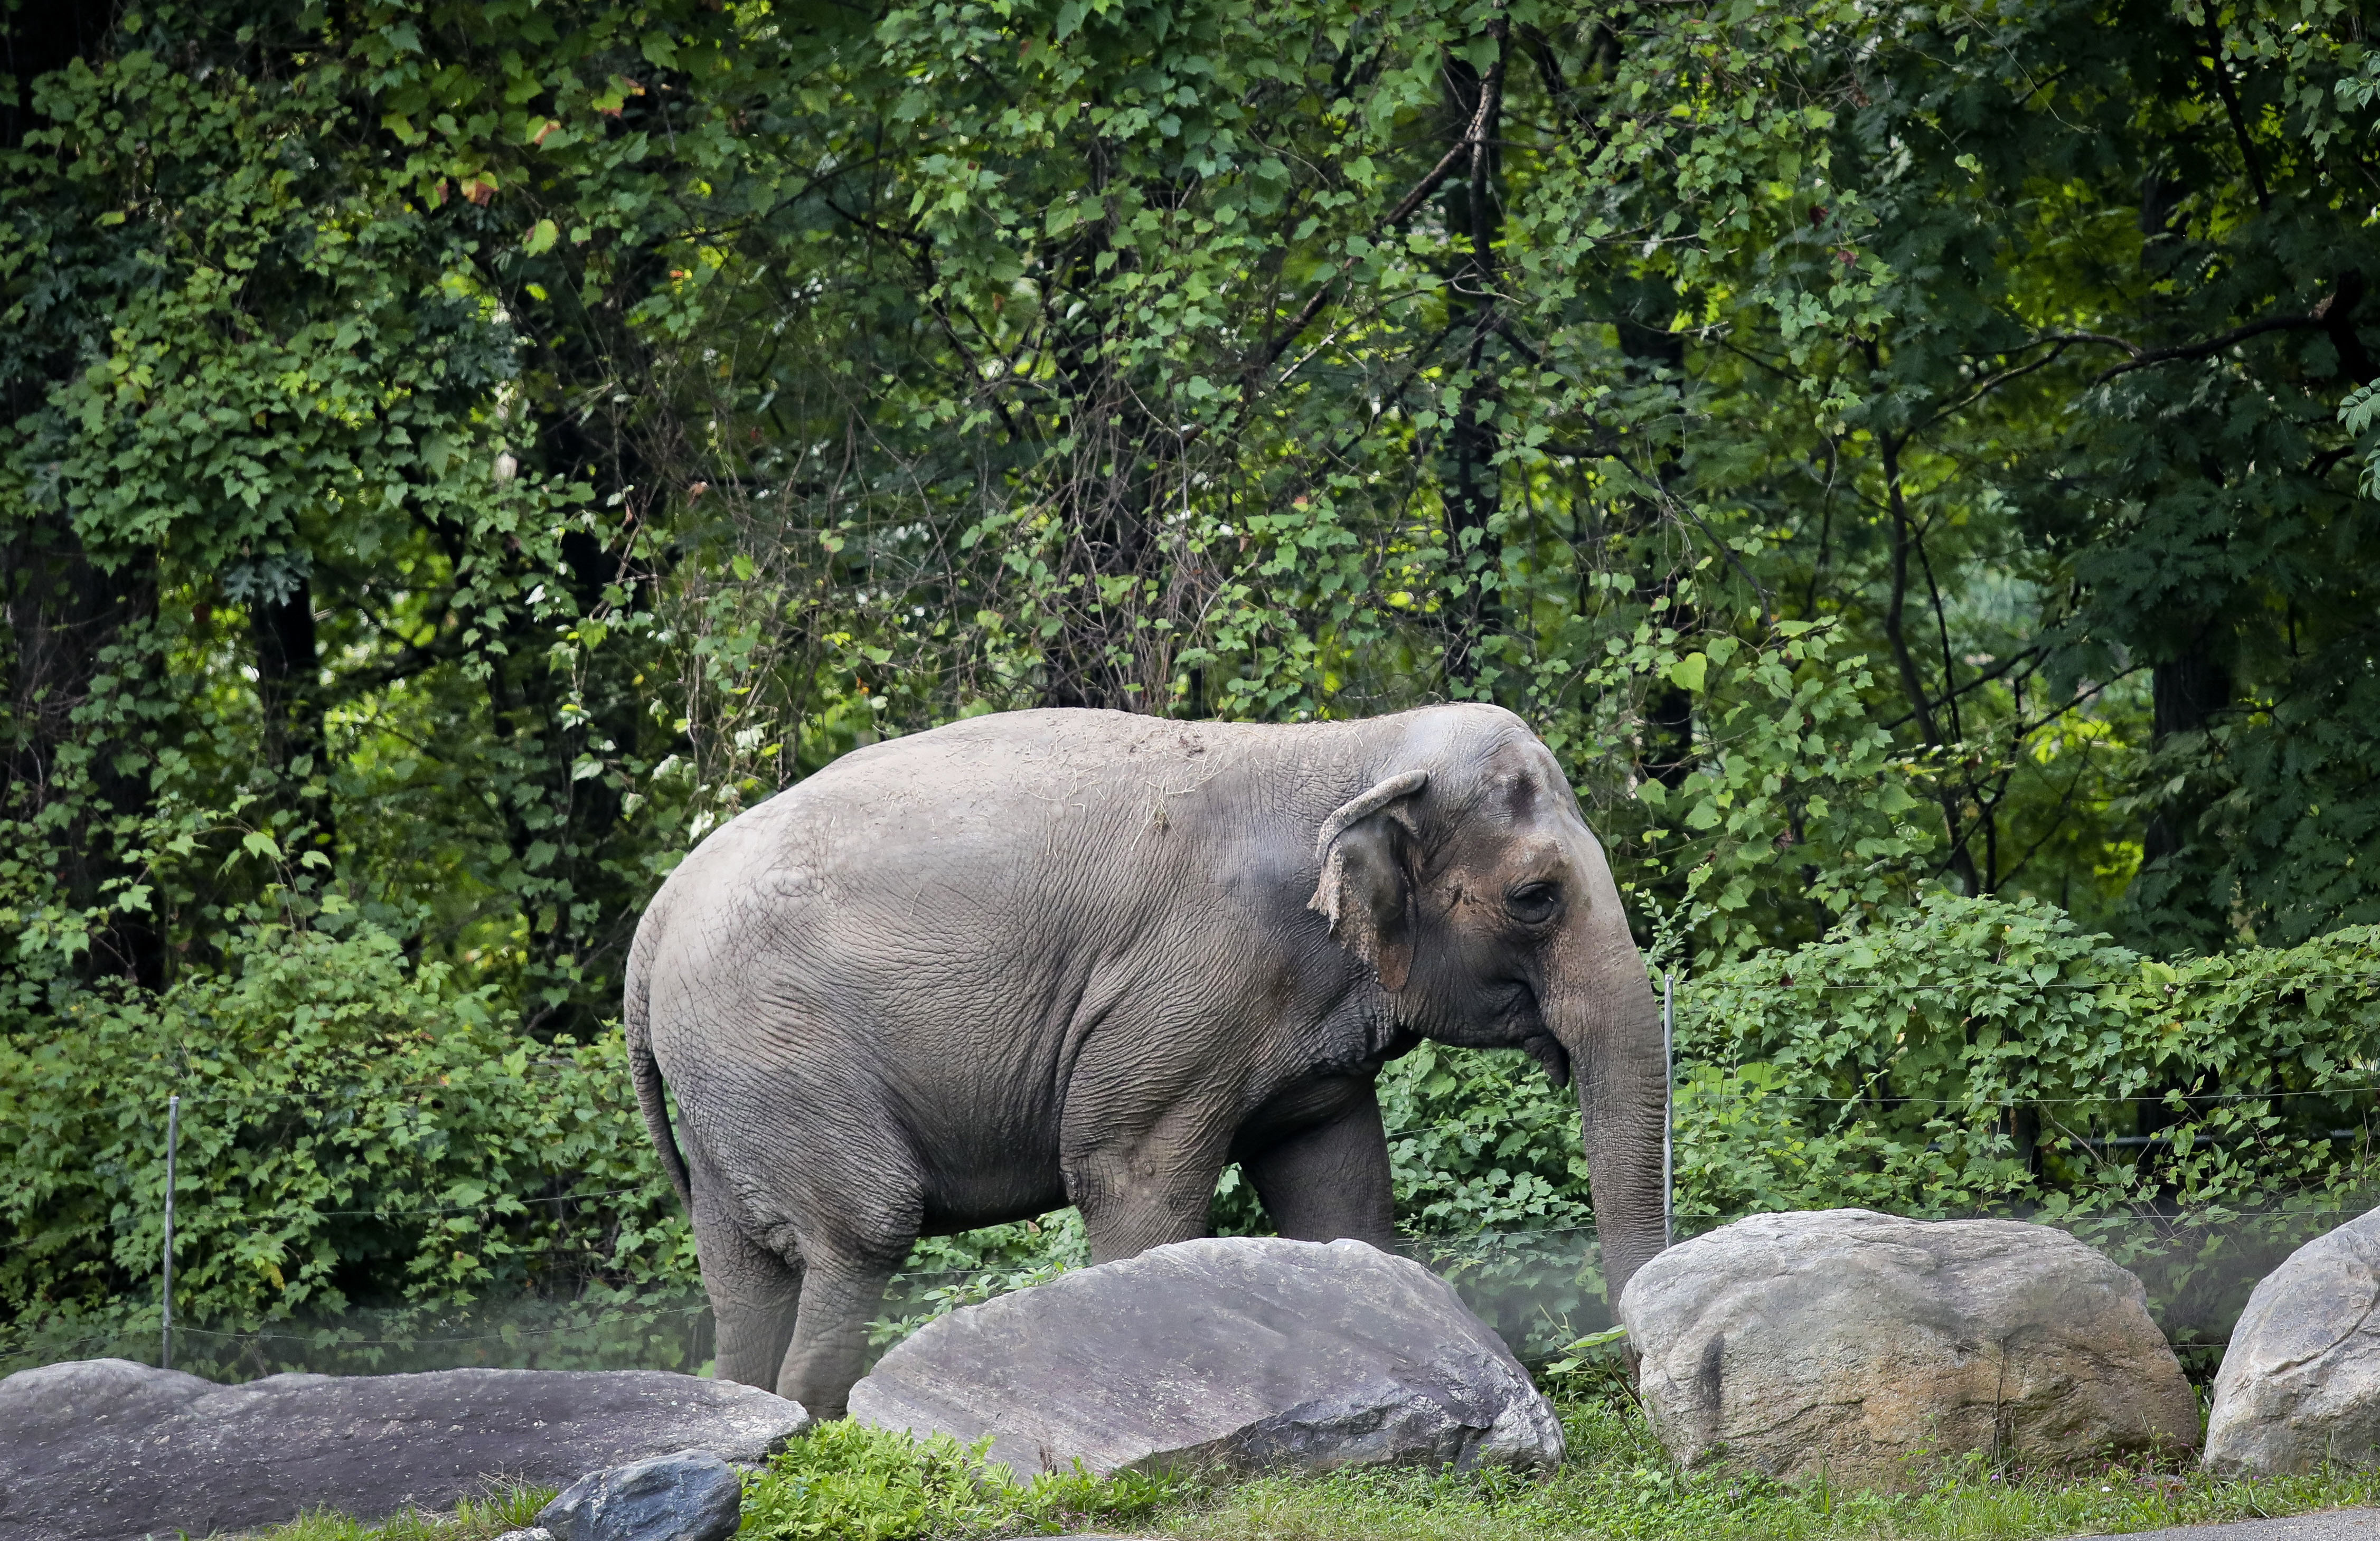 Happy the elephant at Bronx Zoo is not a person, New York’s top court rules